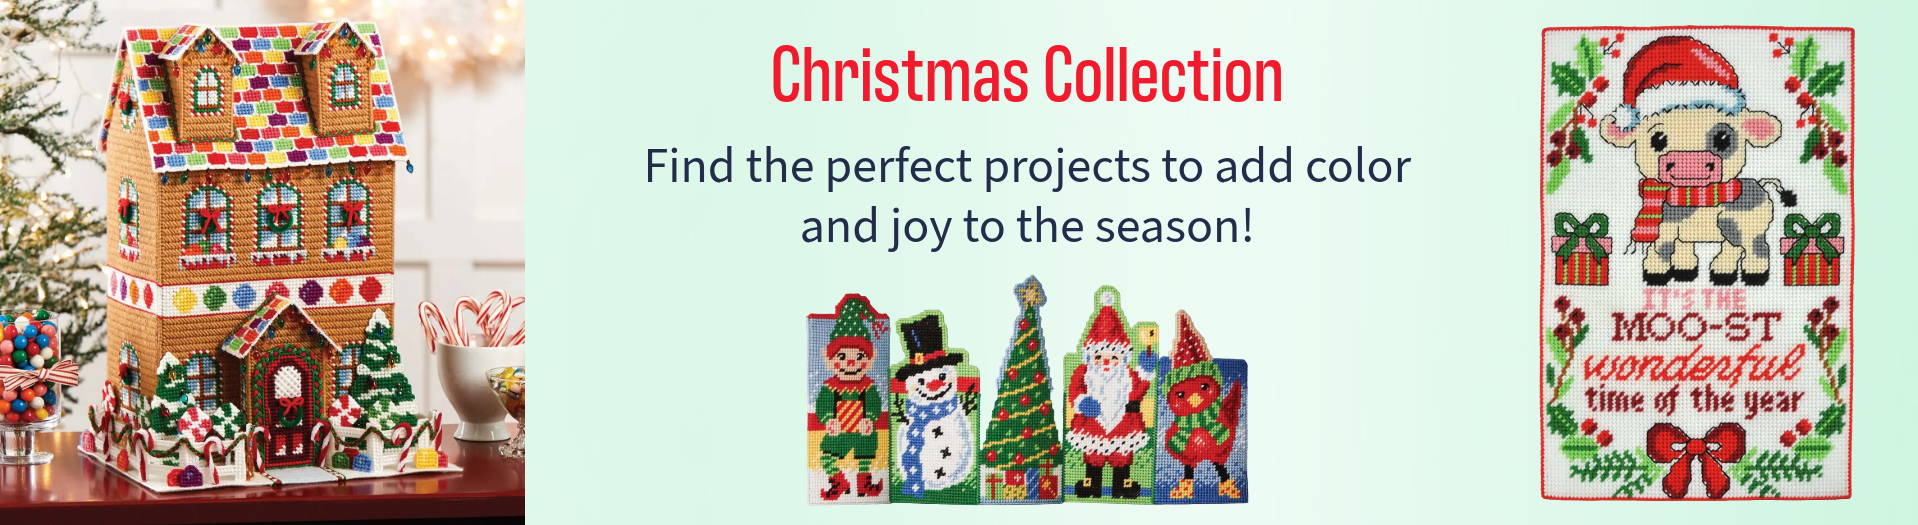 Christmas Collection. Image: Featured Christmas projects and kits.